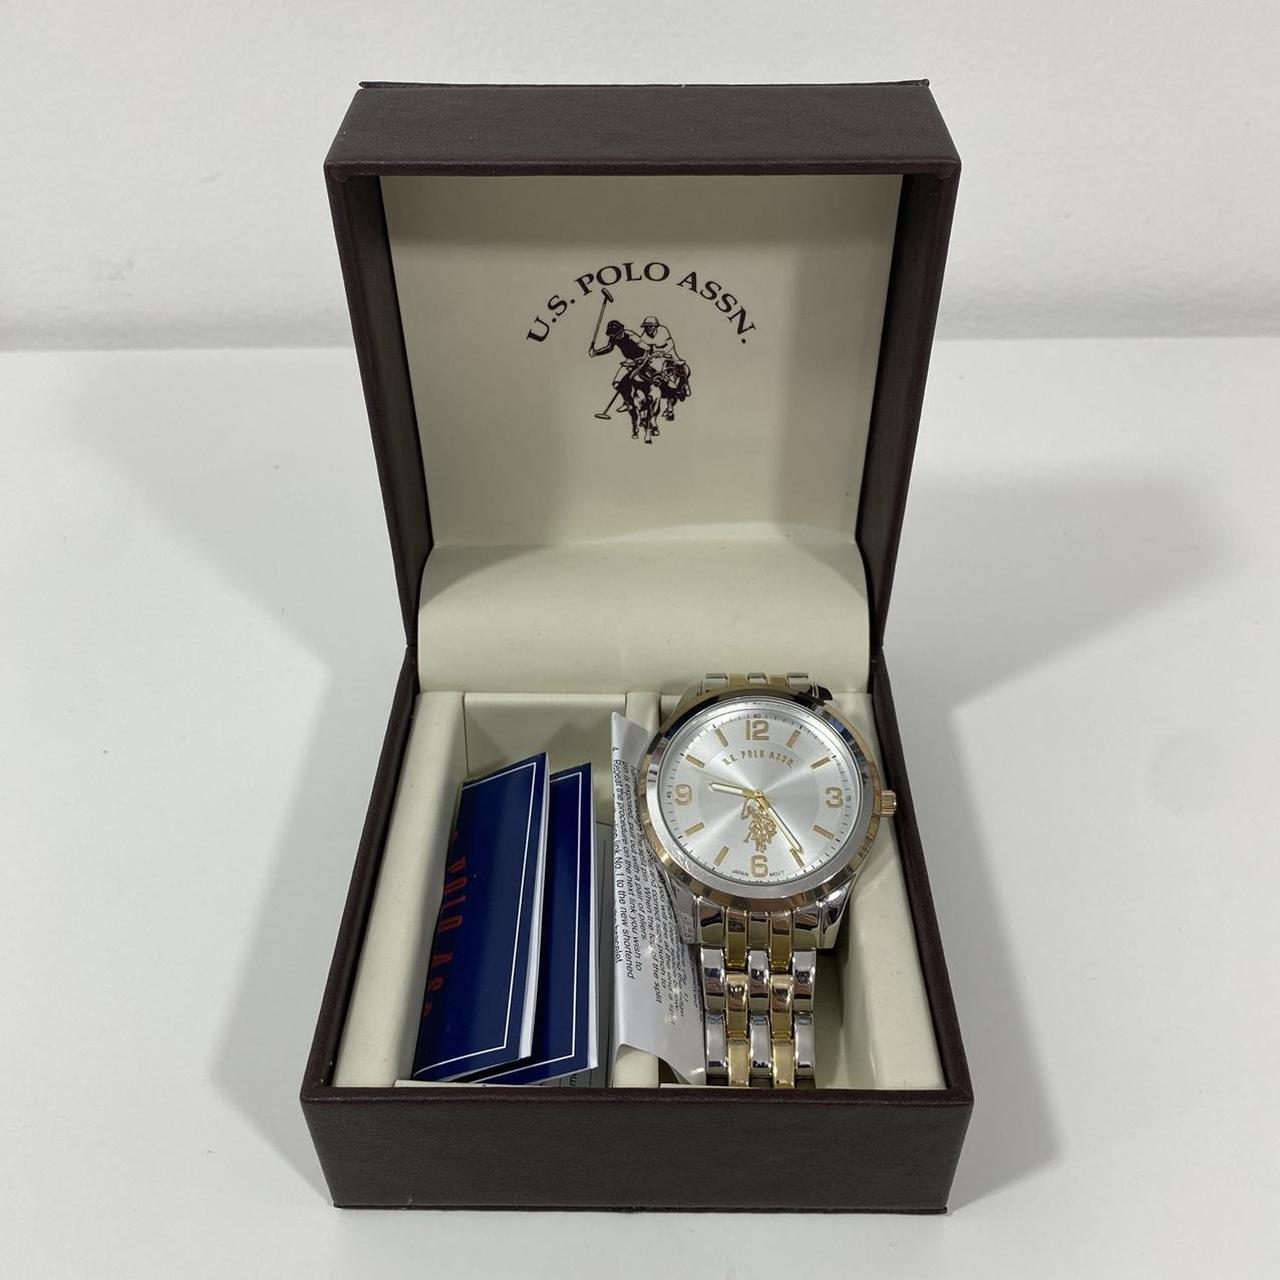 U.S. Polo Assn. Men's Silver and Gold Watch (2)